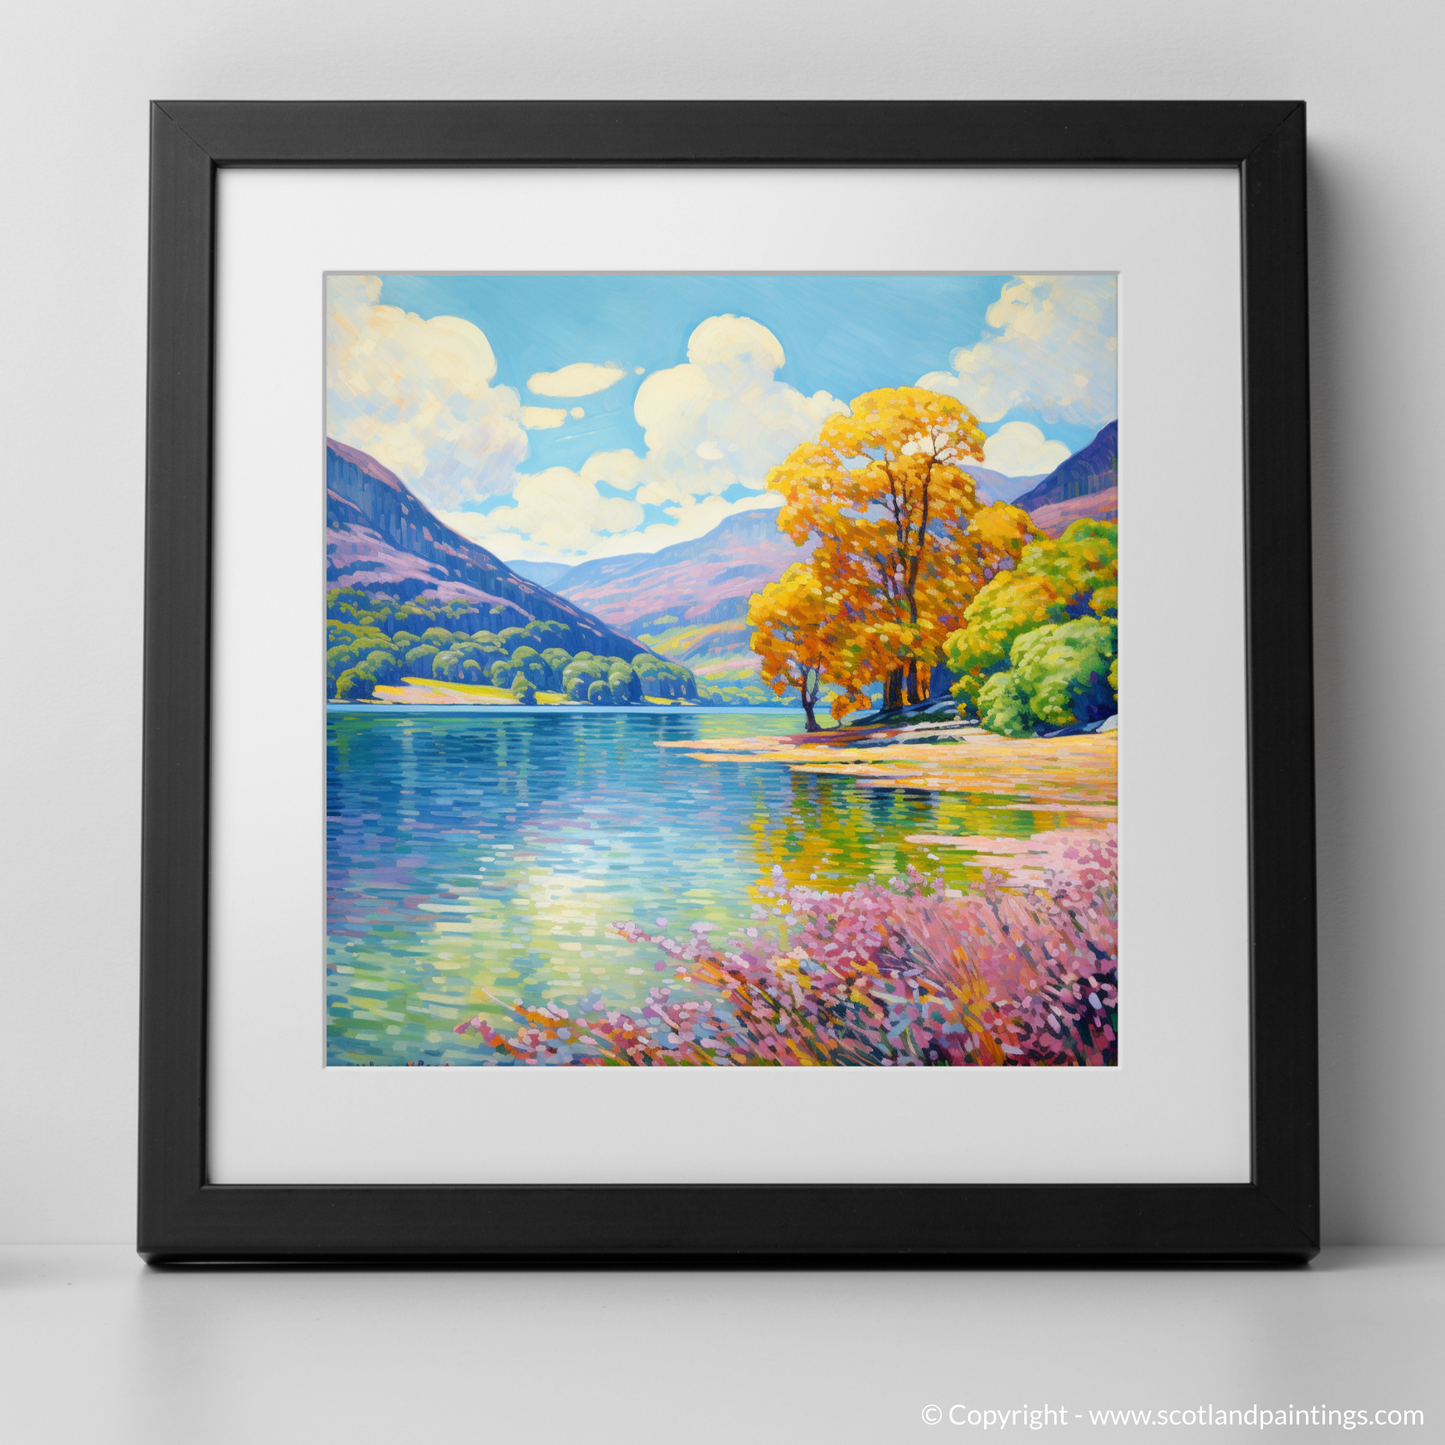 Painting and Art Print of Loch Earn, Perth and Kinross in summer. Summer Serenity at Loch Earn.